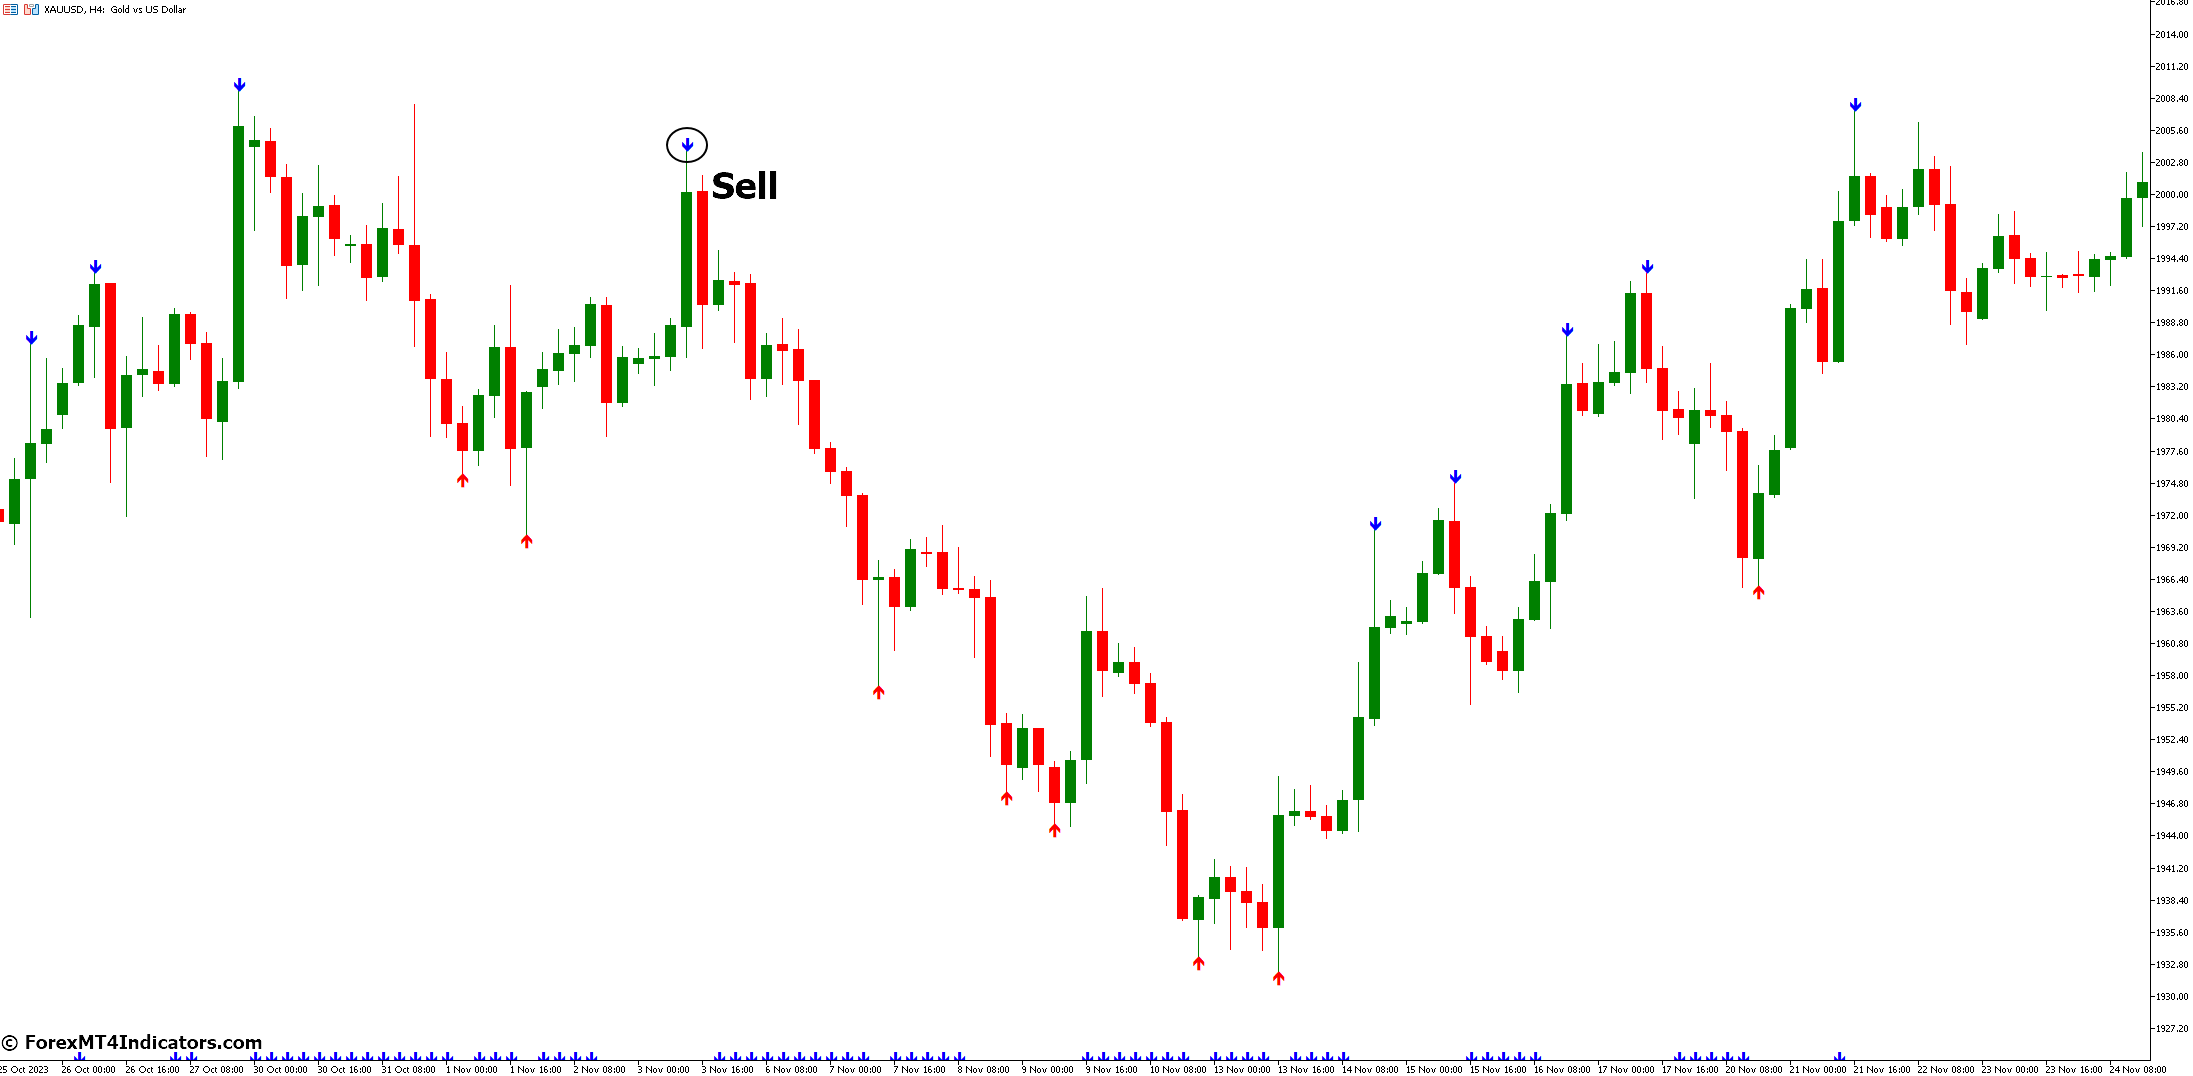 How to Trade with Fractal ZigZag No-Repaint Indicator - Sell Entry